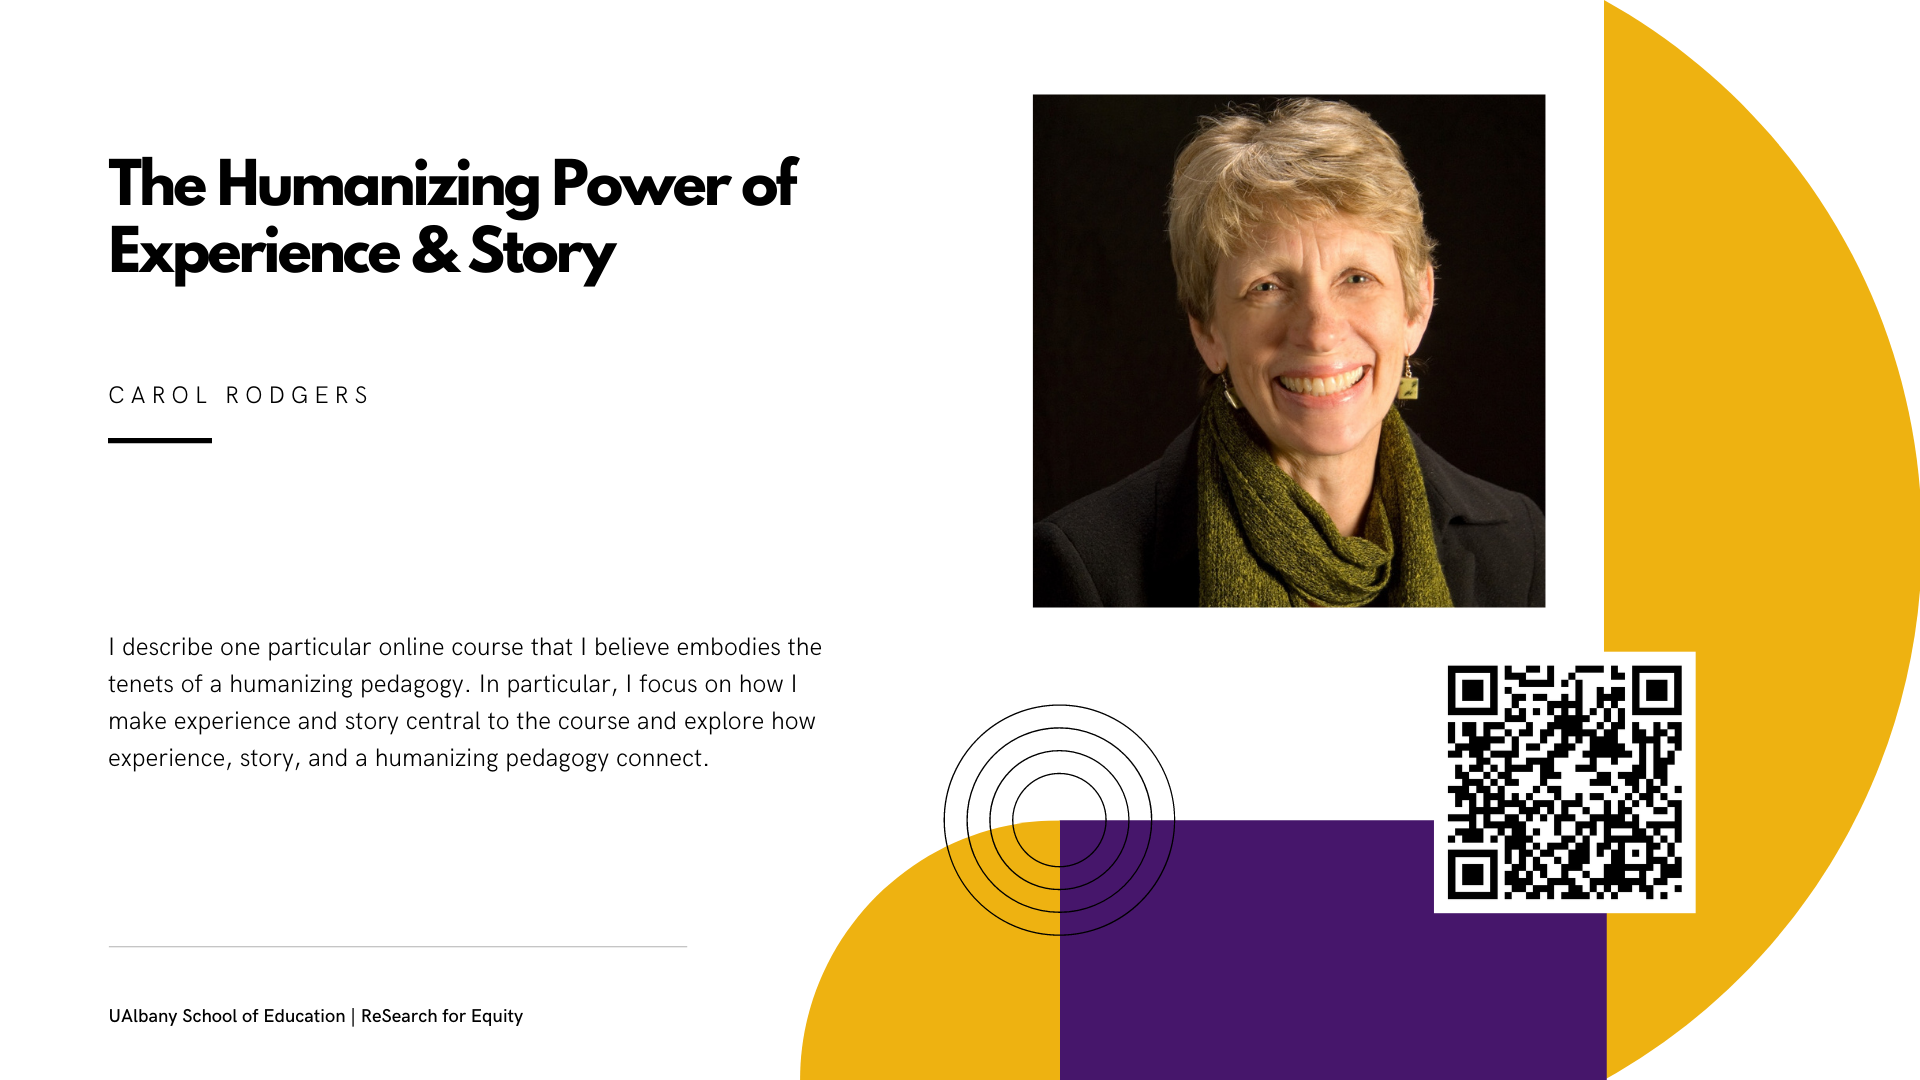 white slide with title and same text as caption, purple and yellow shapes to the right, photo of smiling Carol Rodgers with black top, olive green scarf and black background, QR code